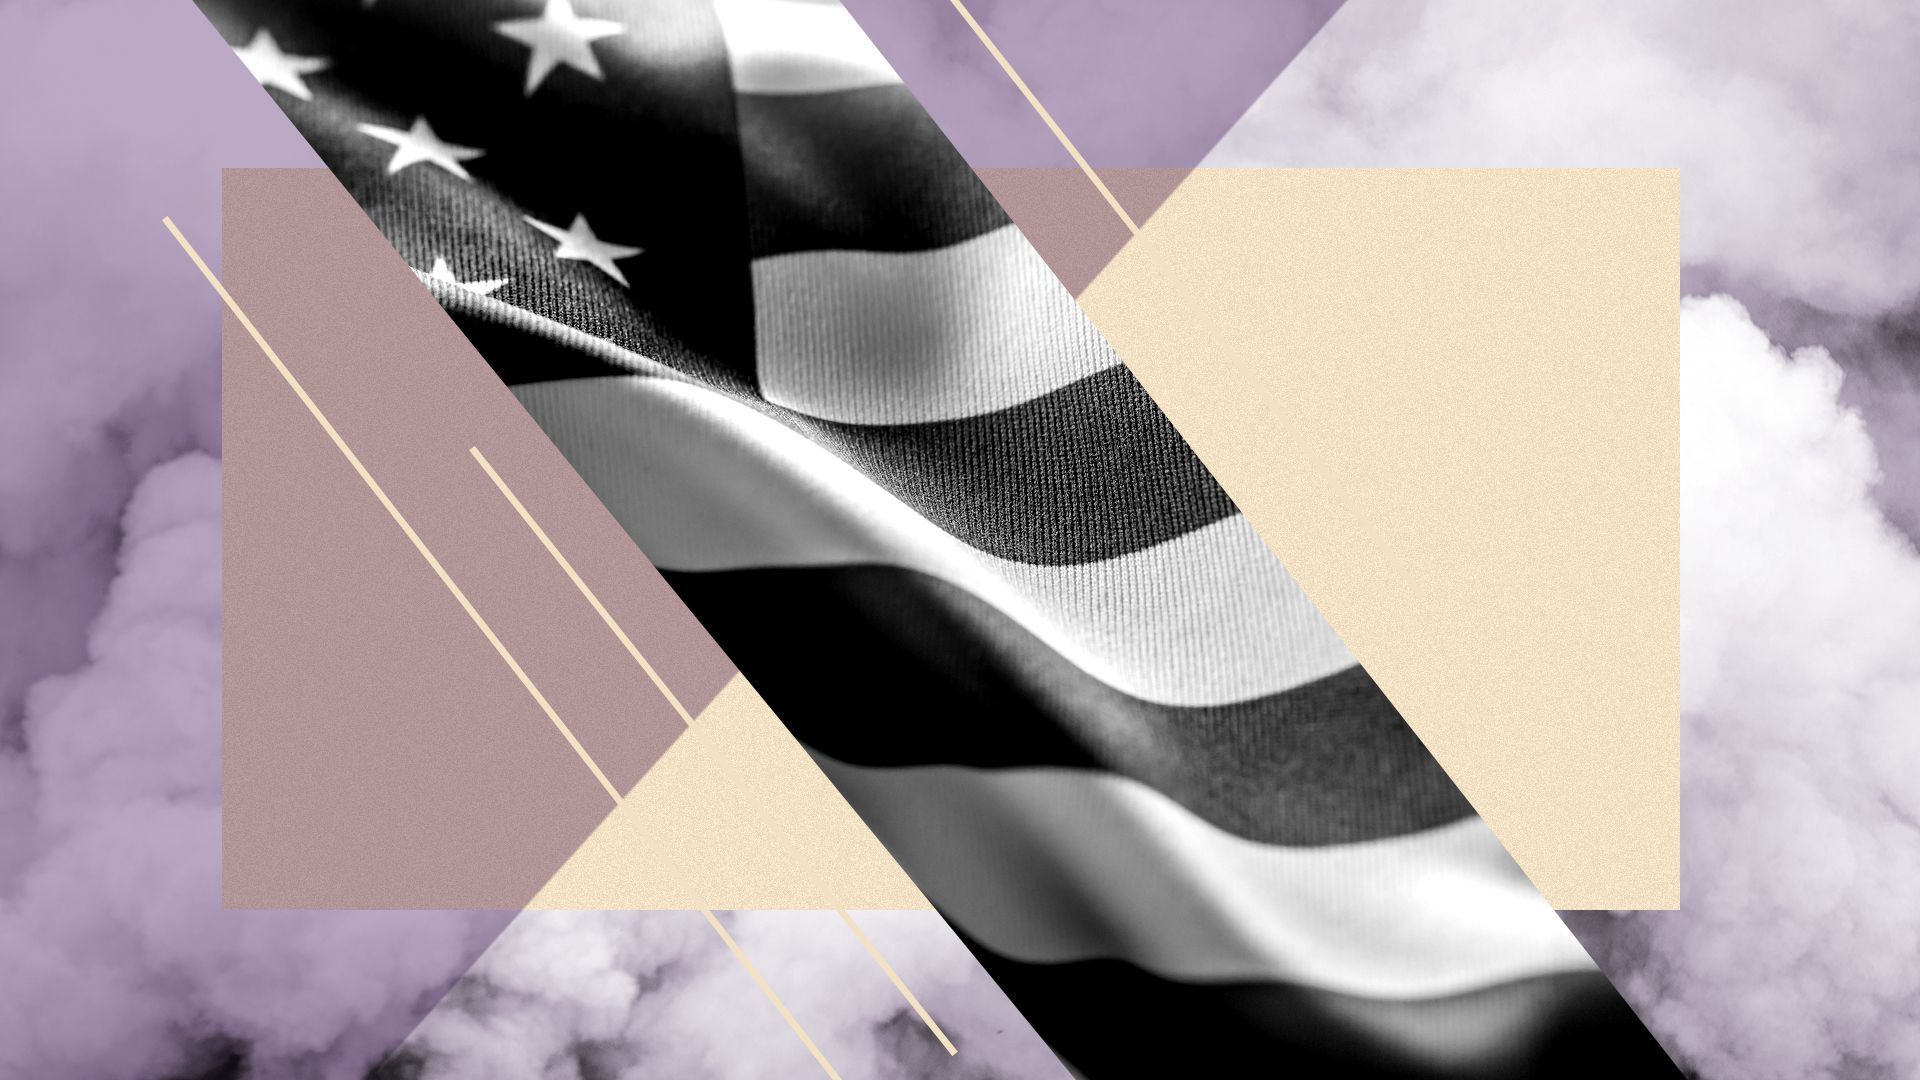 Illustration collage of the US flag image amongst geometric shapes and a photo of fog